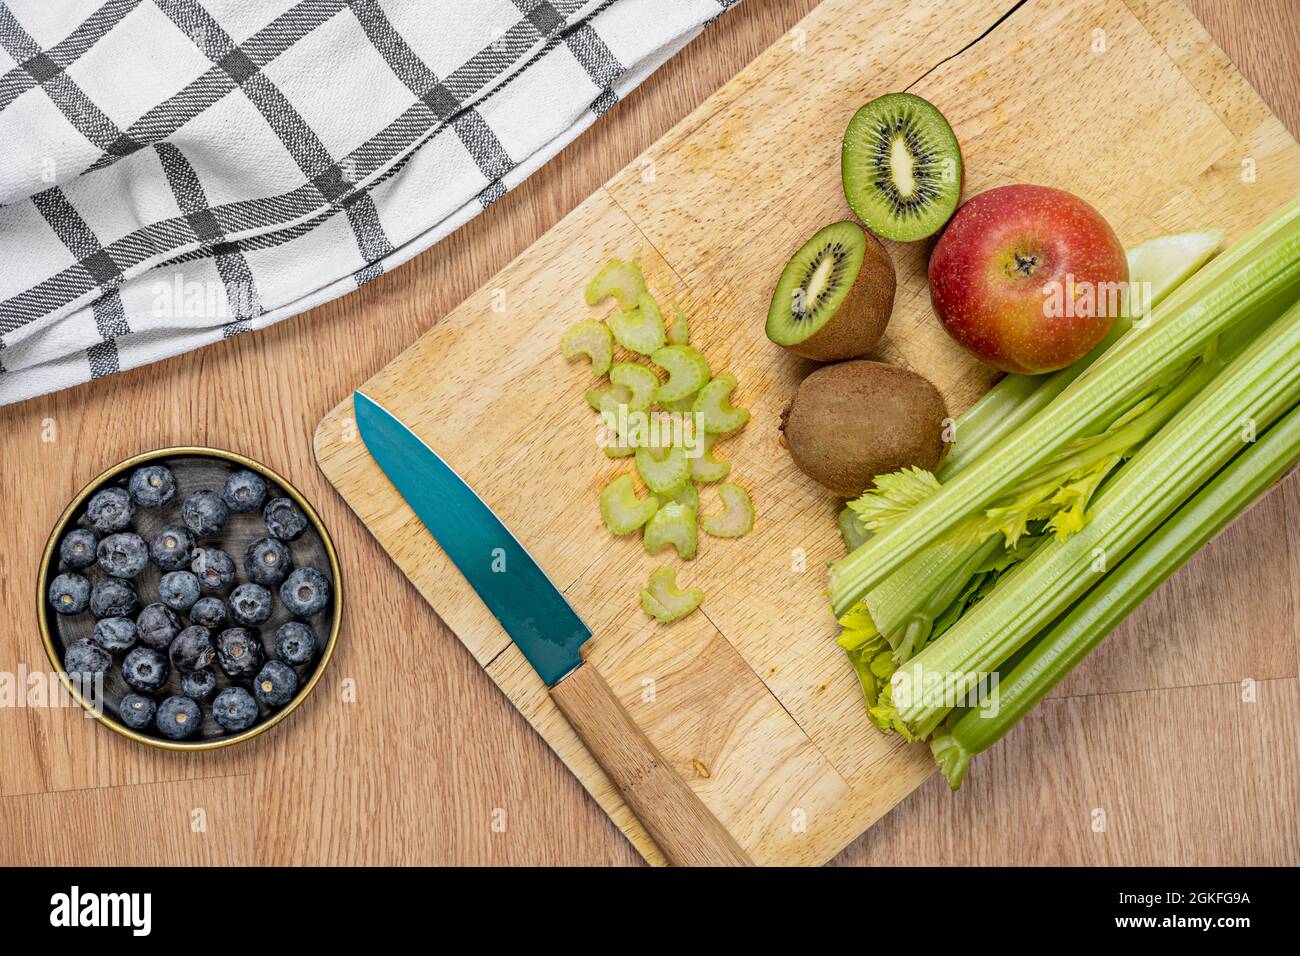 top view picture of fruits and vegetables to make detox juice with knife and kitchen towel Stock Photo